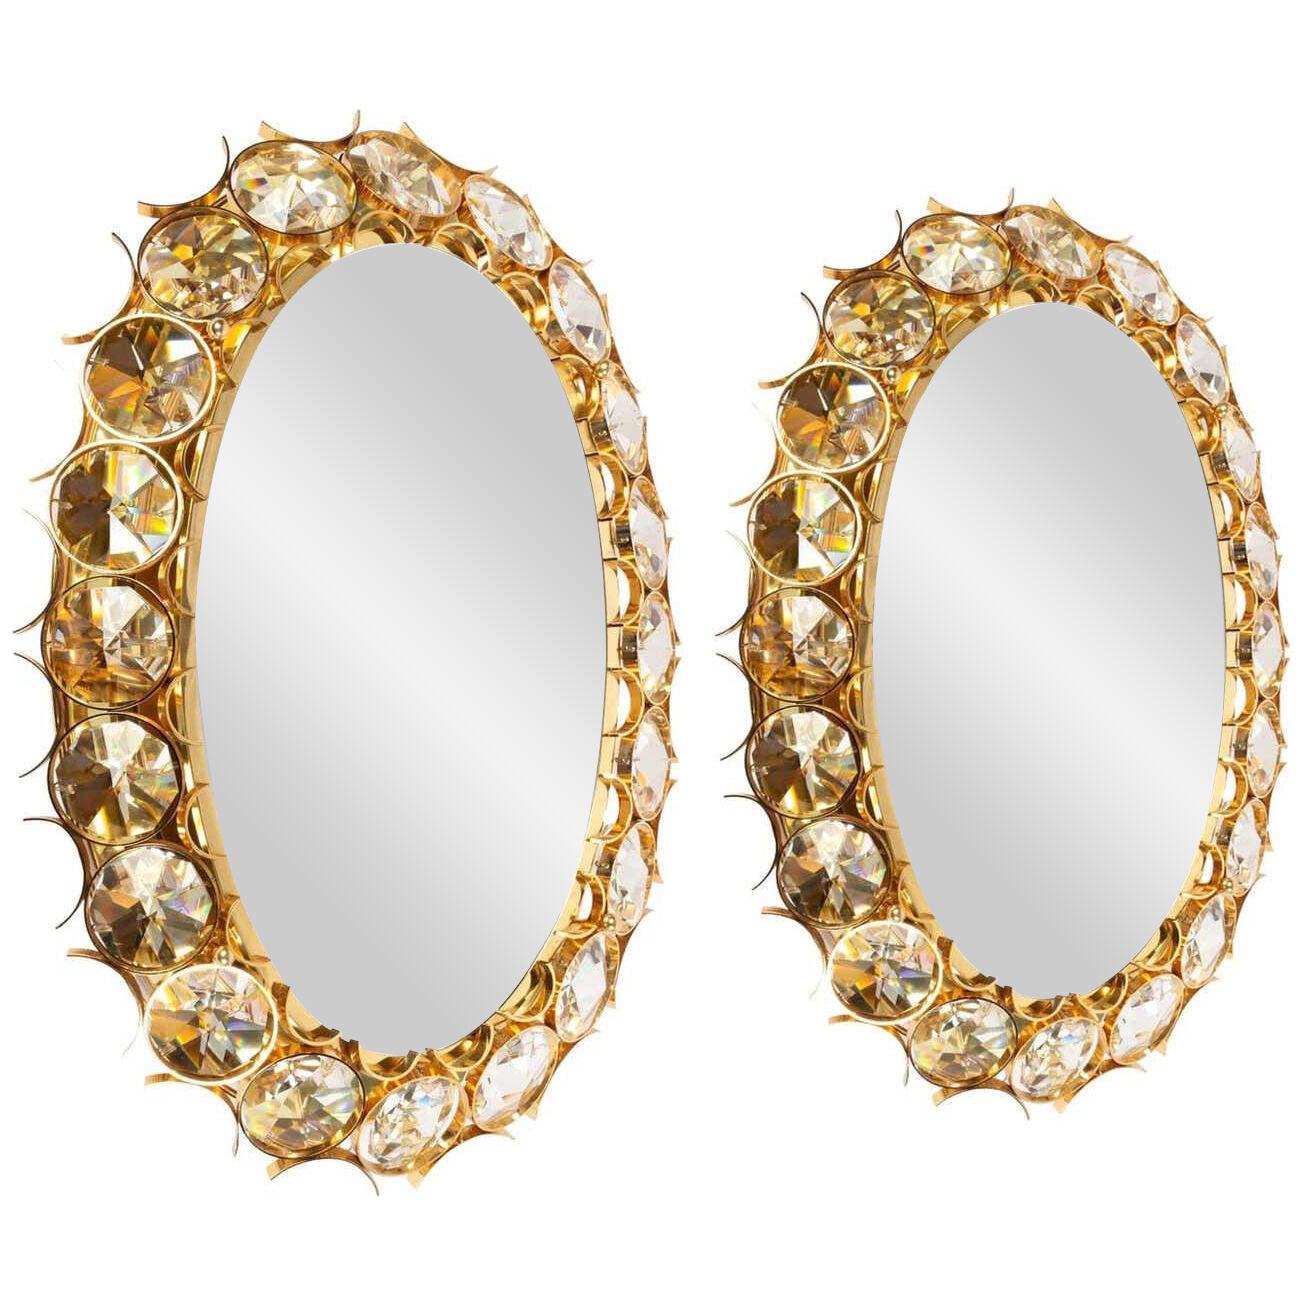 Pair of 1980s "costume jewelry" style backlit mirrors.